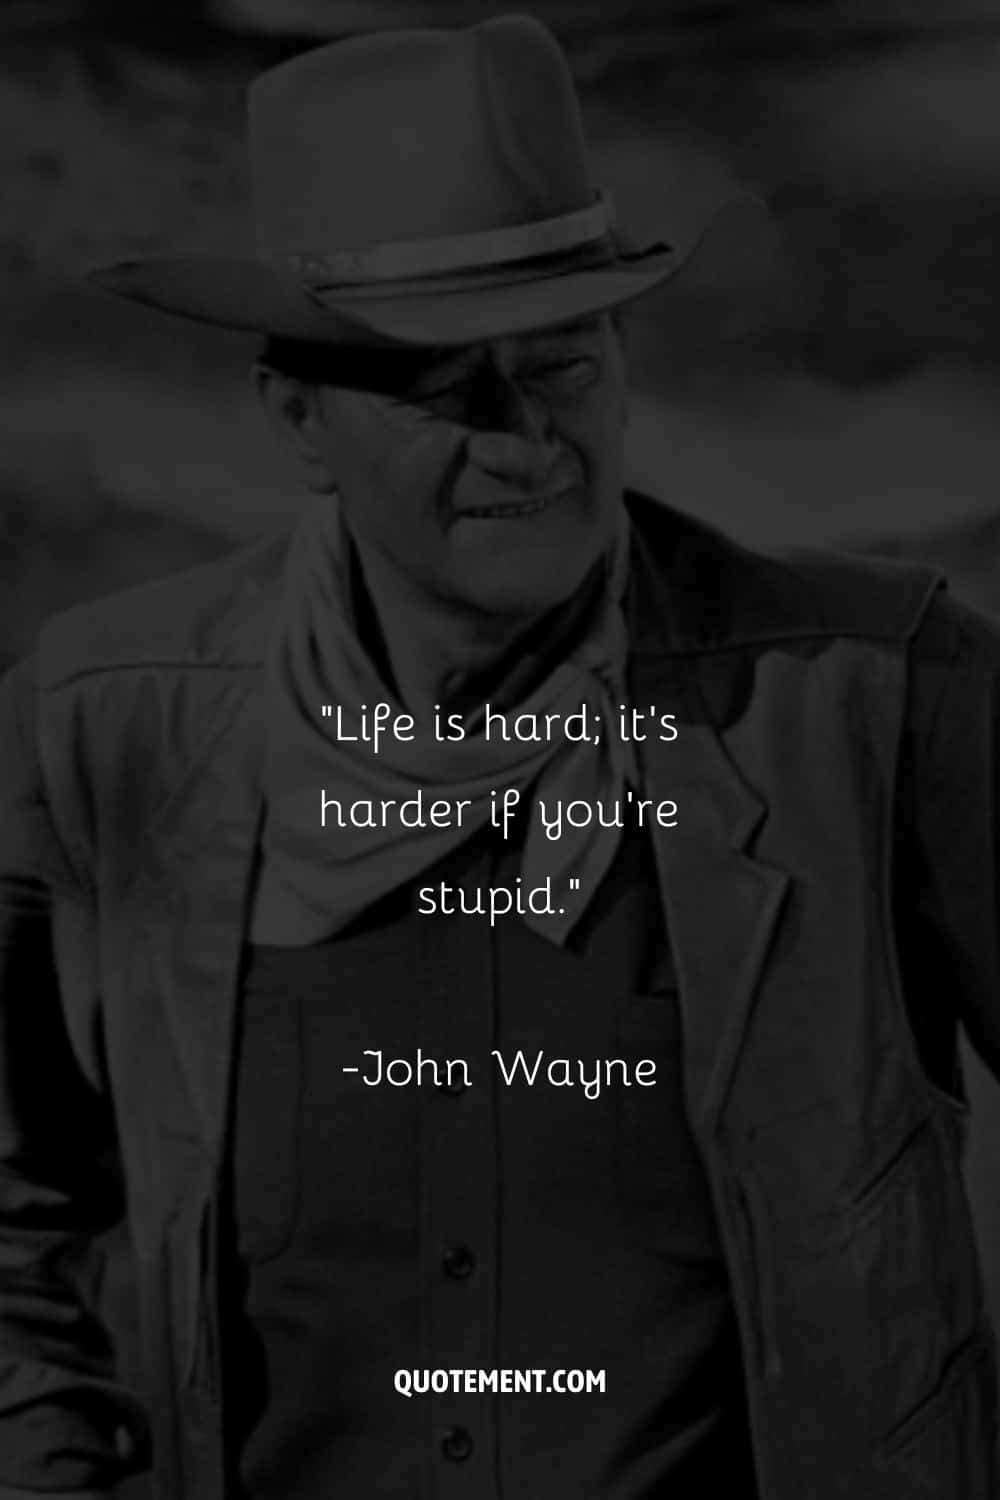 Life is hard; it's harder if you're stupid.